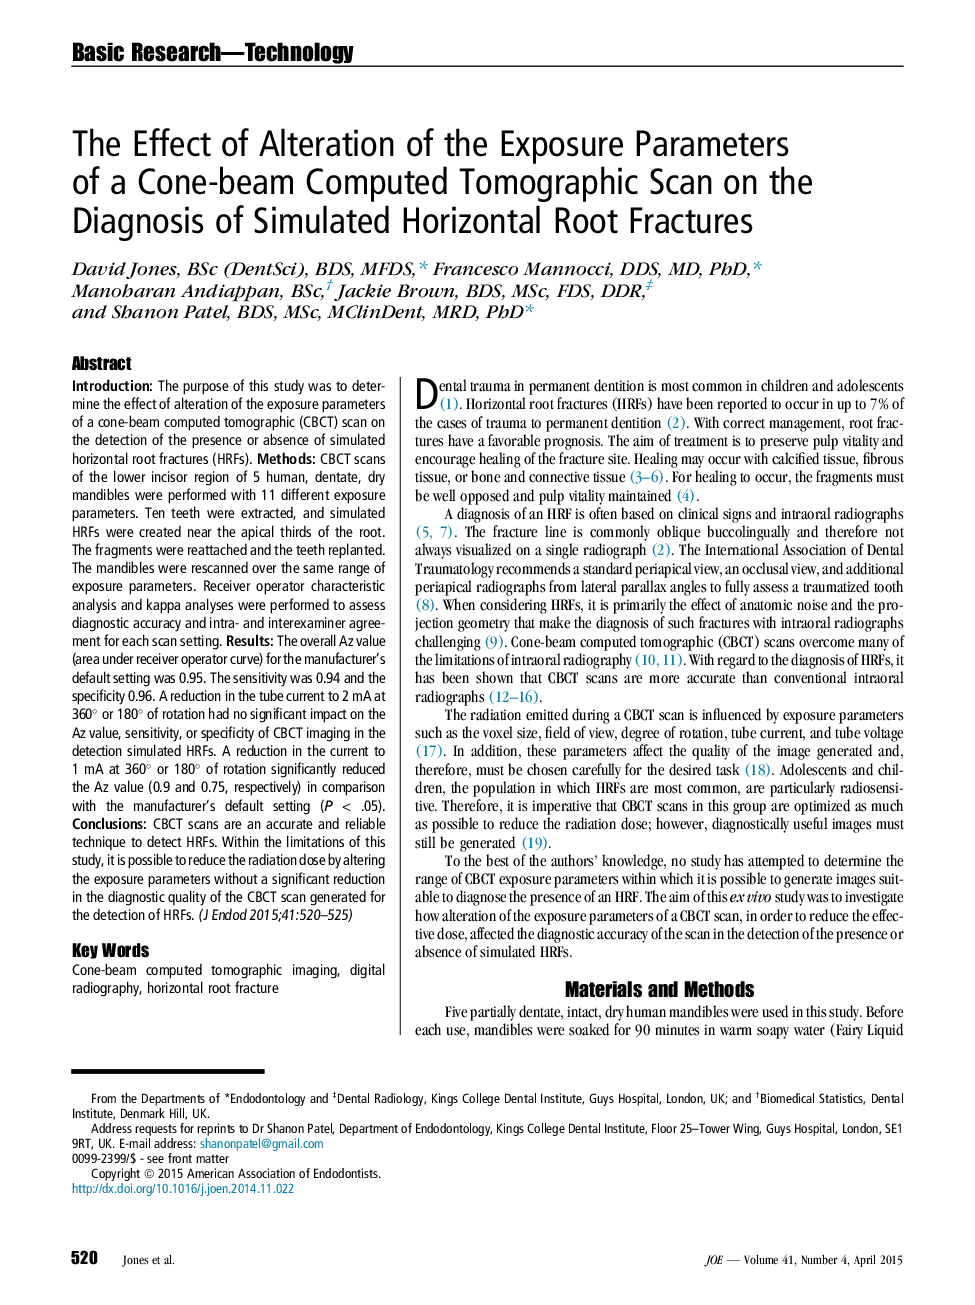 The Effect of Alteration of the Exposure Parameters of a Cone-beam Computed Tomographic Scan on the Diagnosis of Simulated Horizontal Root Fractures